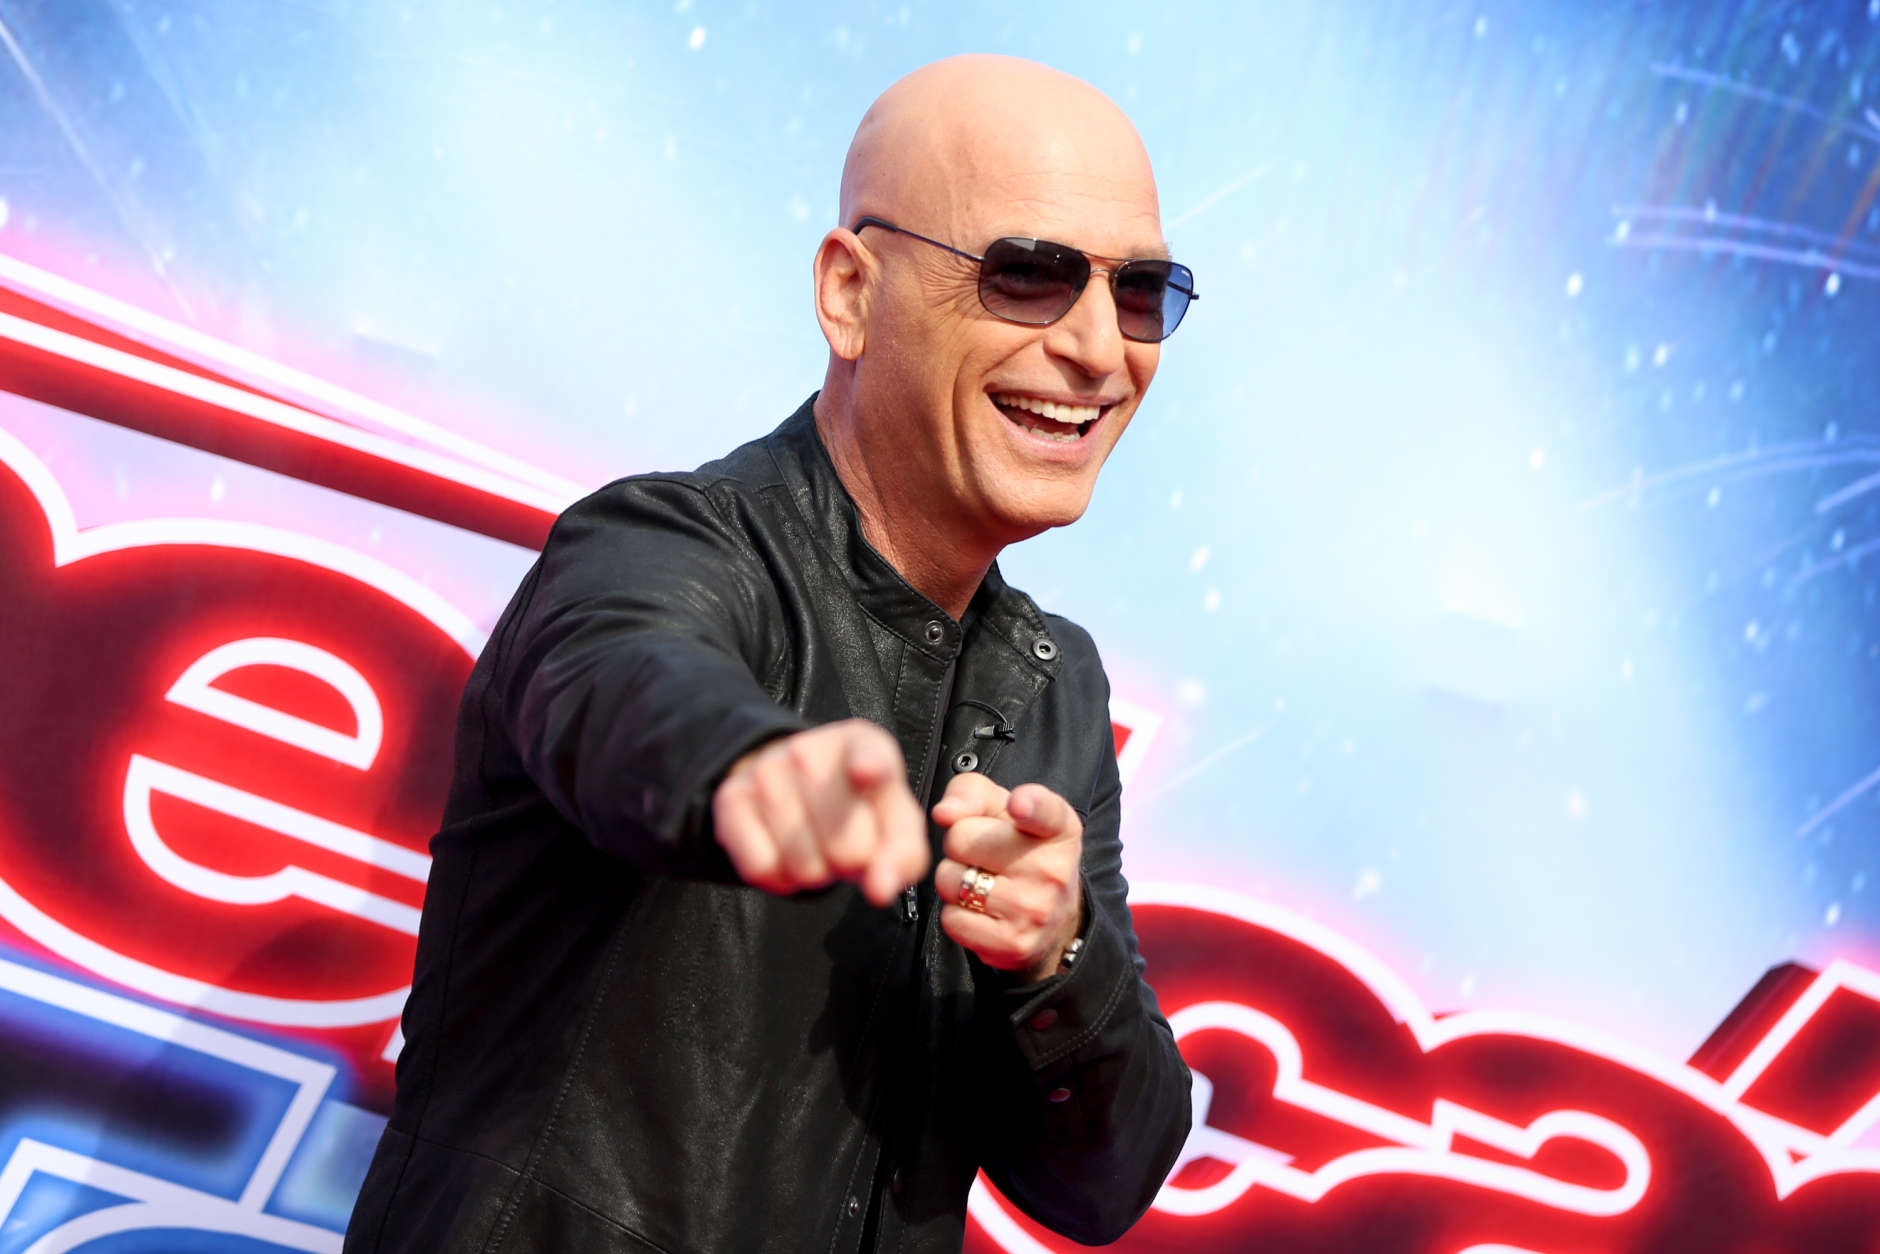 Howie Mandel arrives at the "America's Got Talent" Season 11 Red Carpet Kickoff at the Pasadena Civic Auditorium on Thursday, March 3, 2016, in Pasadena, Calif. (Photo by Rich Fury/Invision/AP)